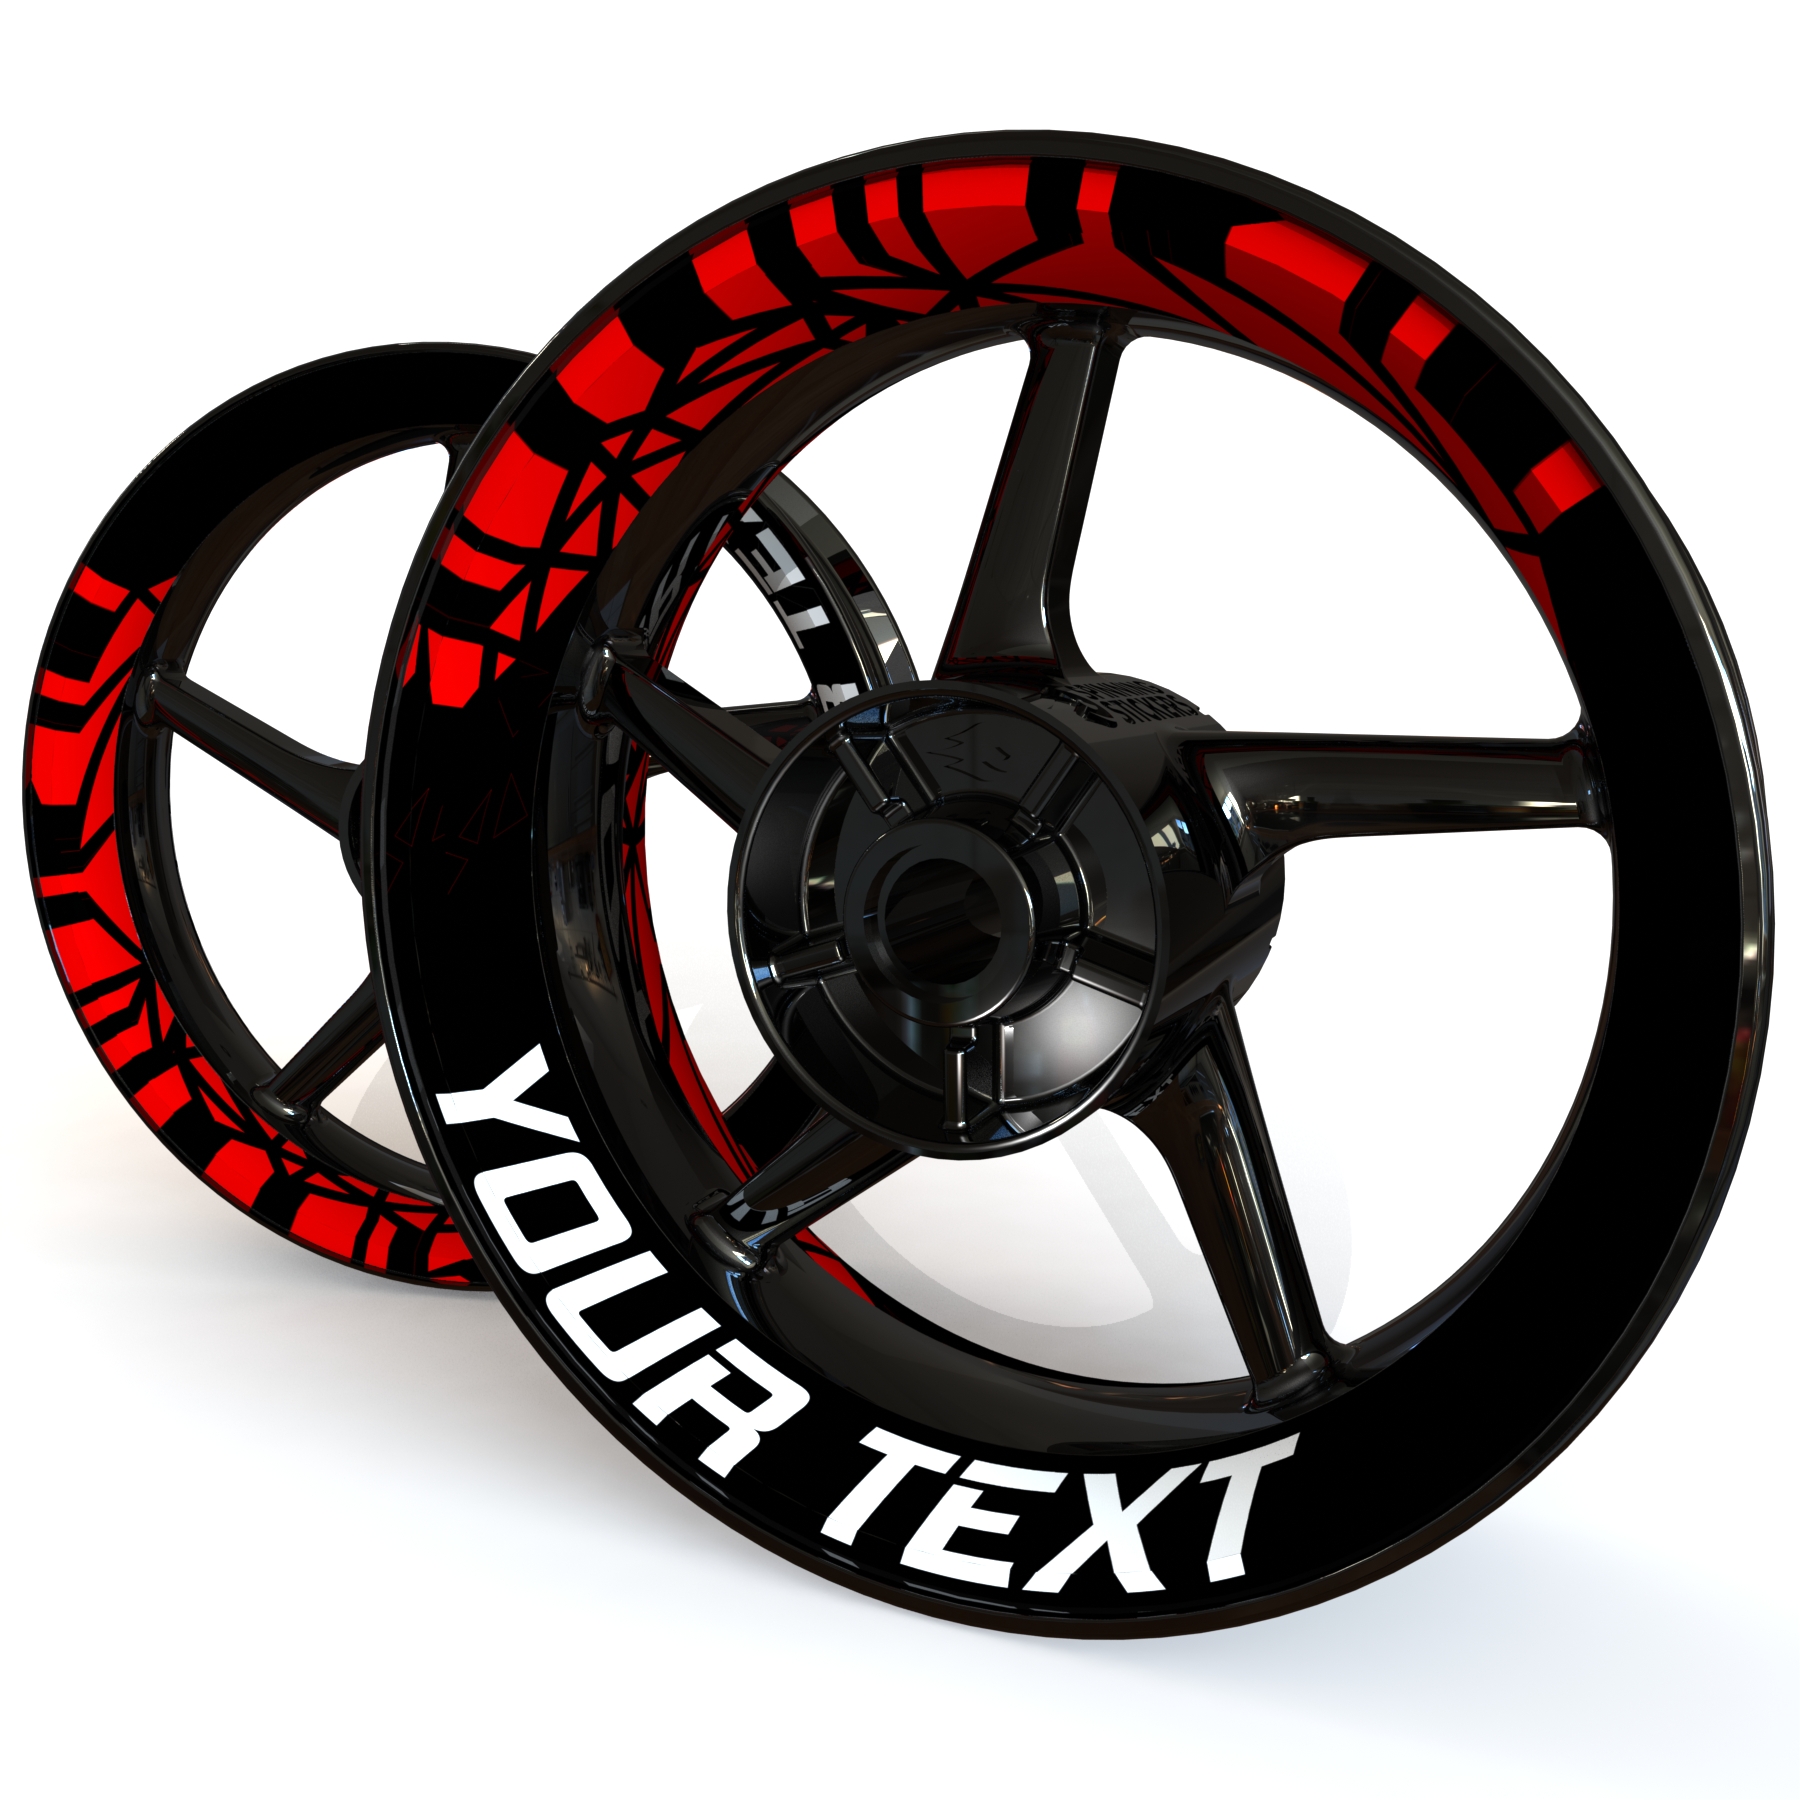 Black rim with your text rim stickers in black and red